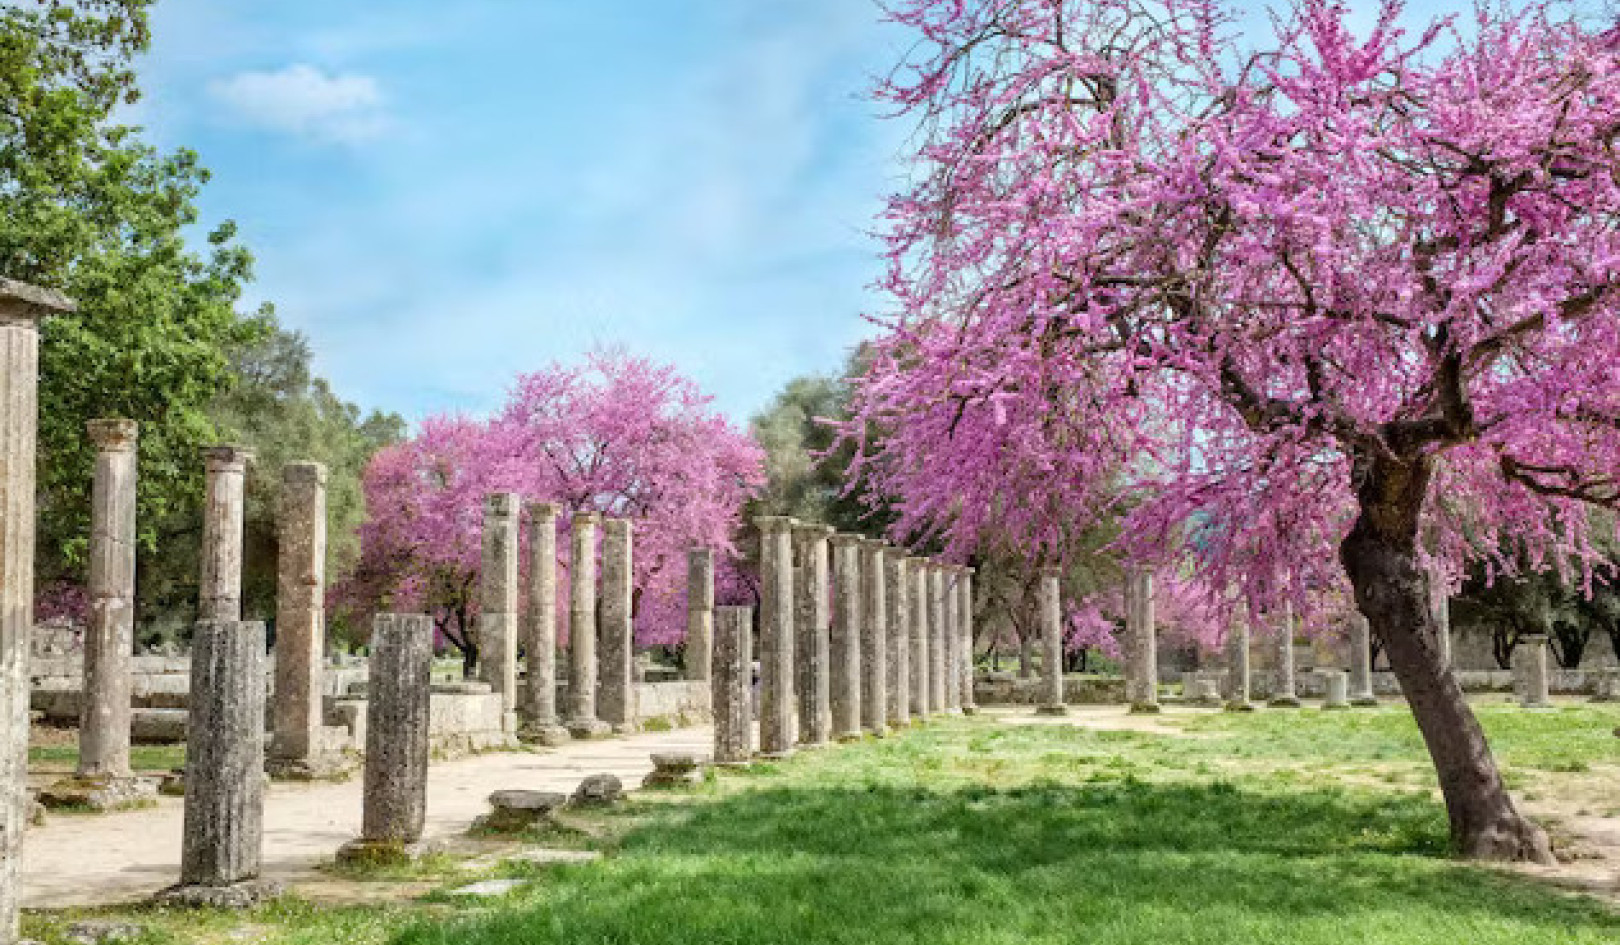 What Ancient Greek Stories Of Humans Transformed Into Plants Can Teach Us About Fragility And Resilience